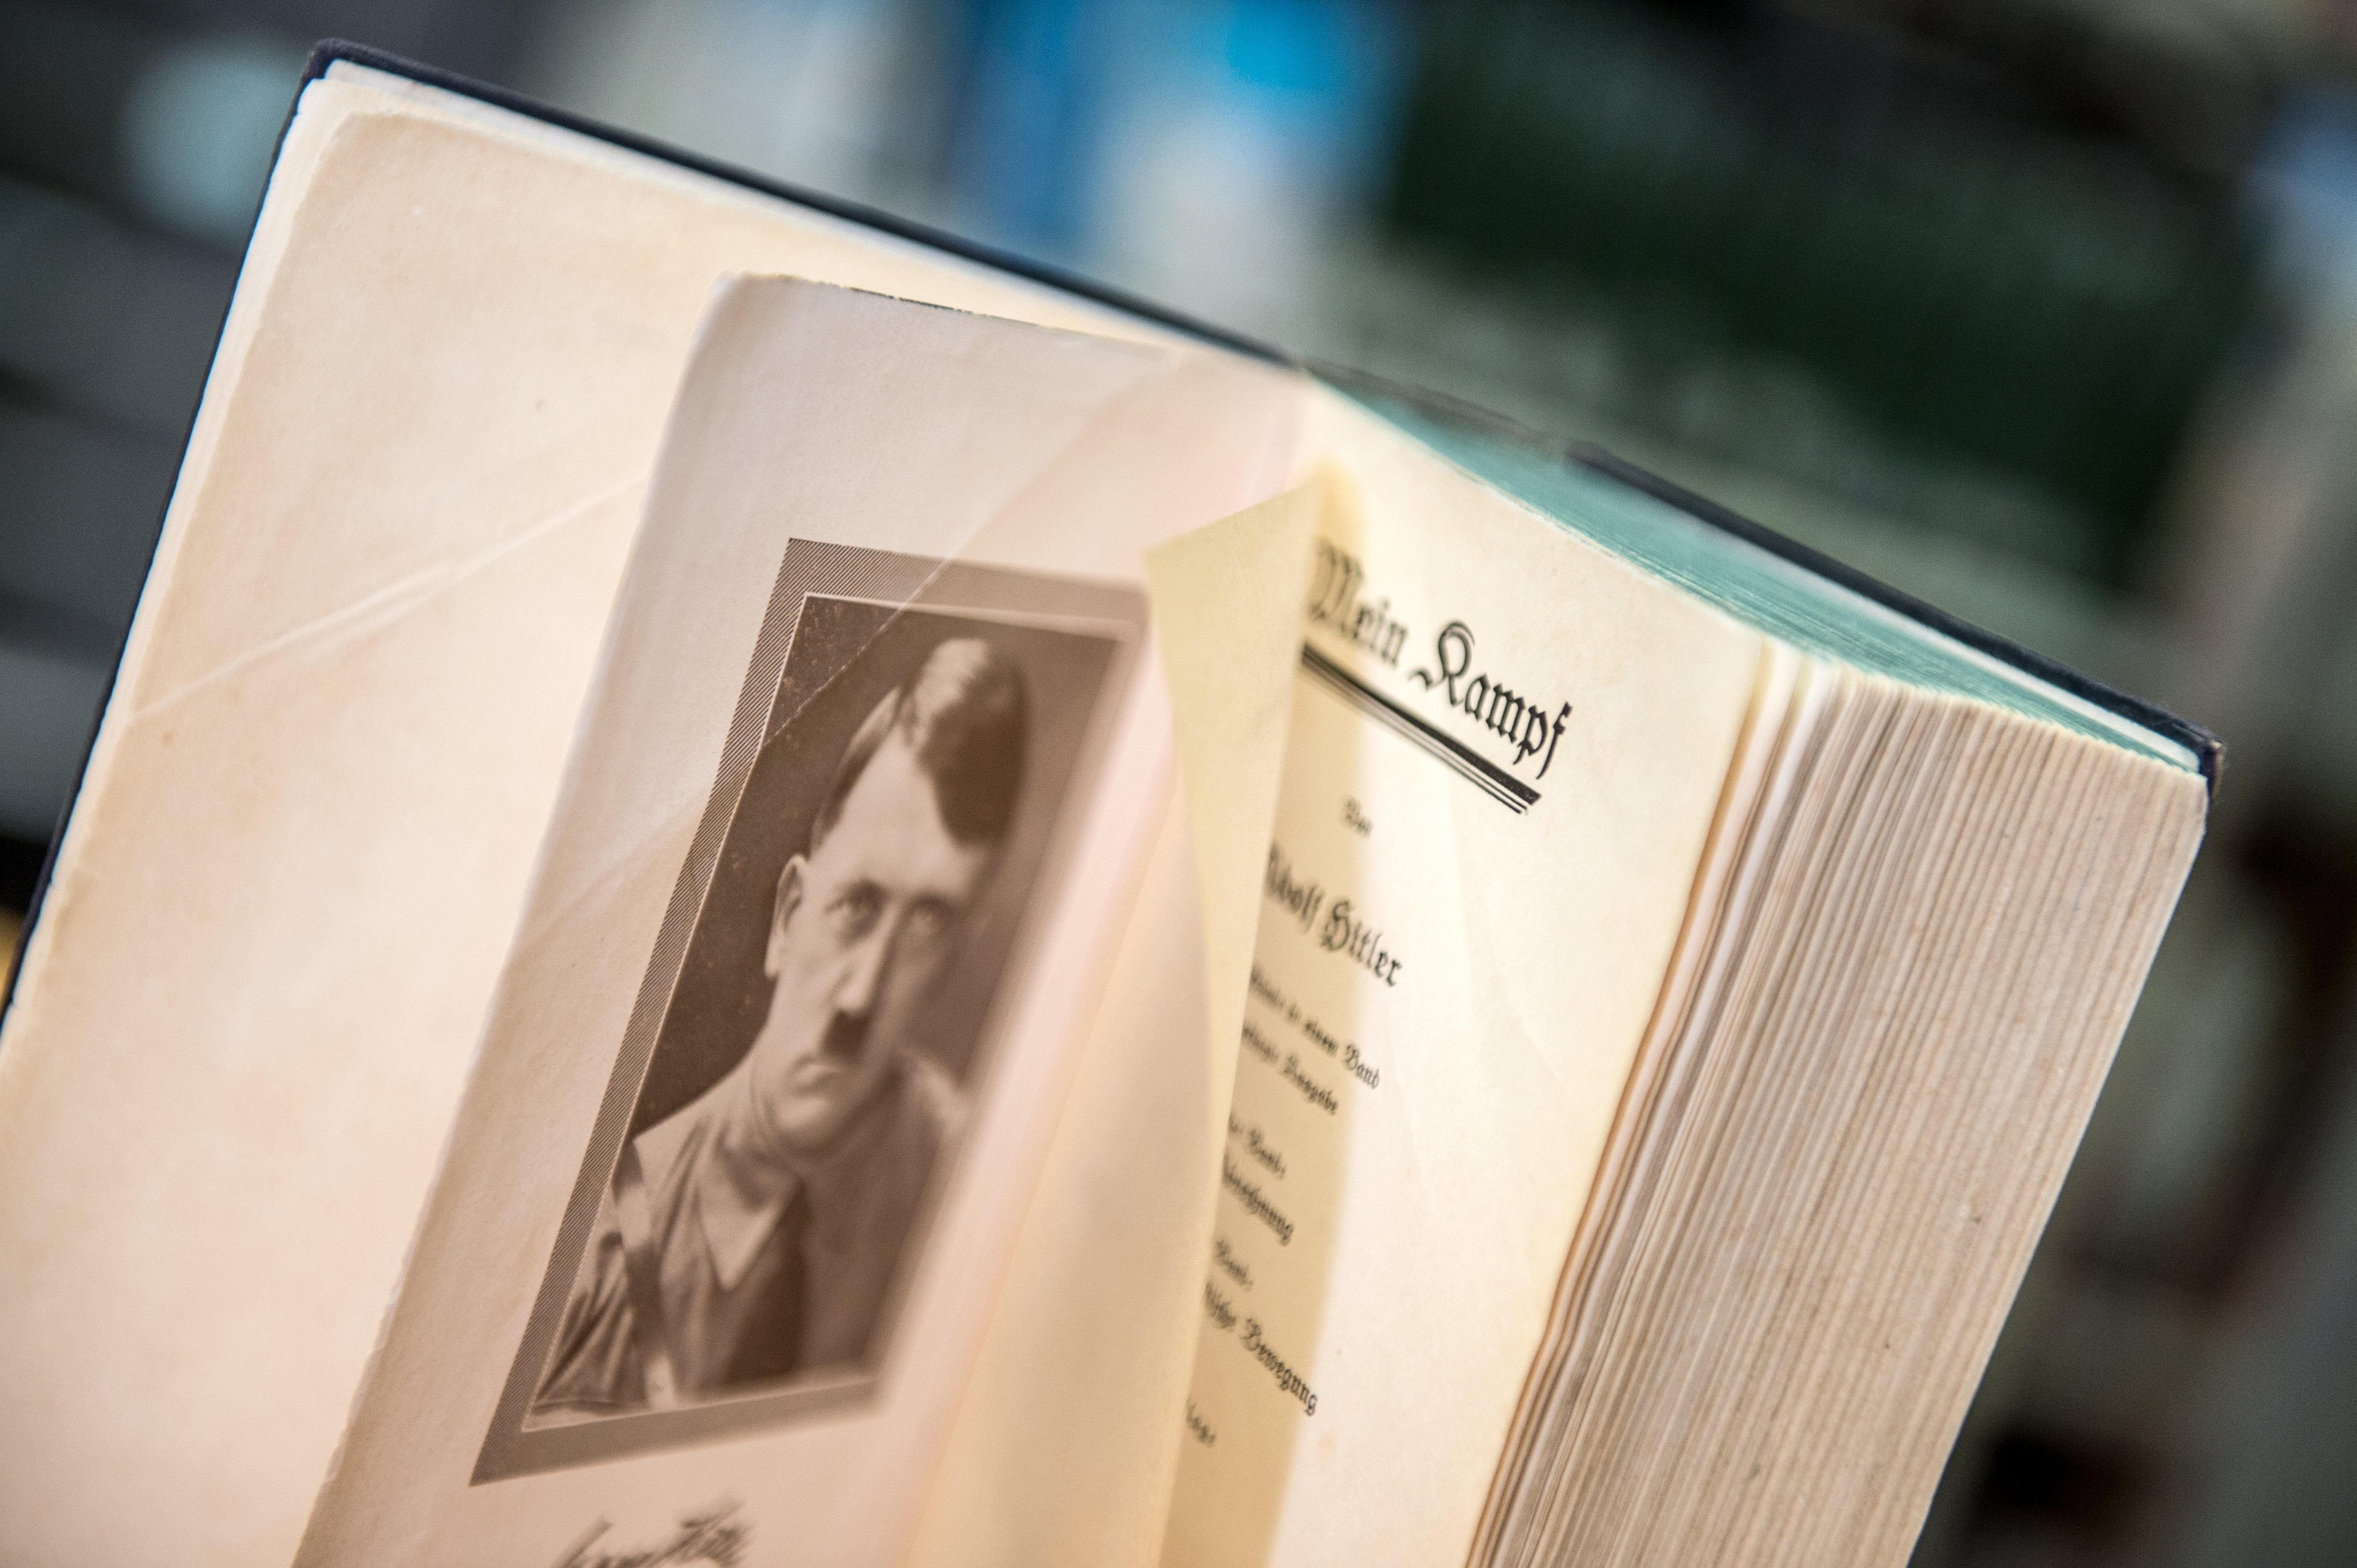 An opened page of the original edition of Hitler's inflammatory pamphlet  'Mein Kampf' shows a portrait of national socialist dictator Adolf Hitler, in a bookshop in Frankfurt, Germany on Jan.7, 2016. (Alexander Heinl—picture-alliance/dpa/AP)